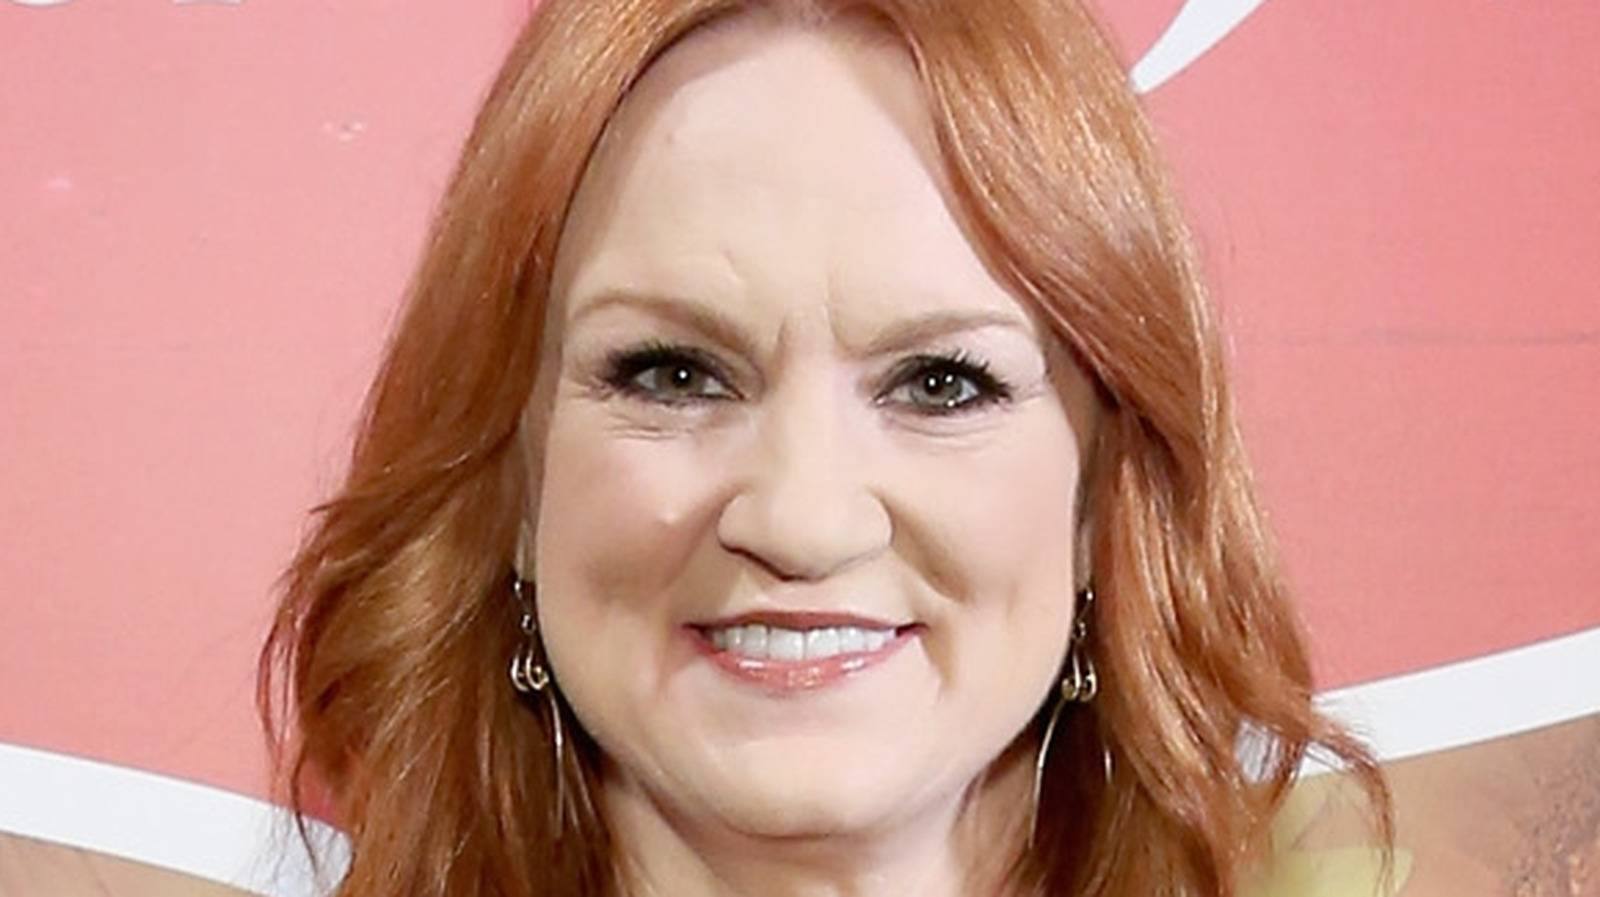 https://www.mashed.com/img/gallery/why-ree-drummond-almost-didnt-marry-her-husband/l-intro-1652816285.jpg